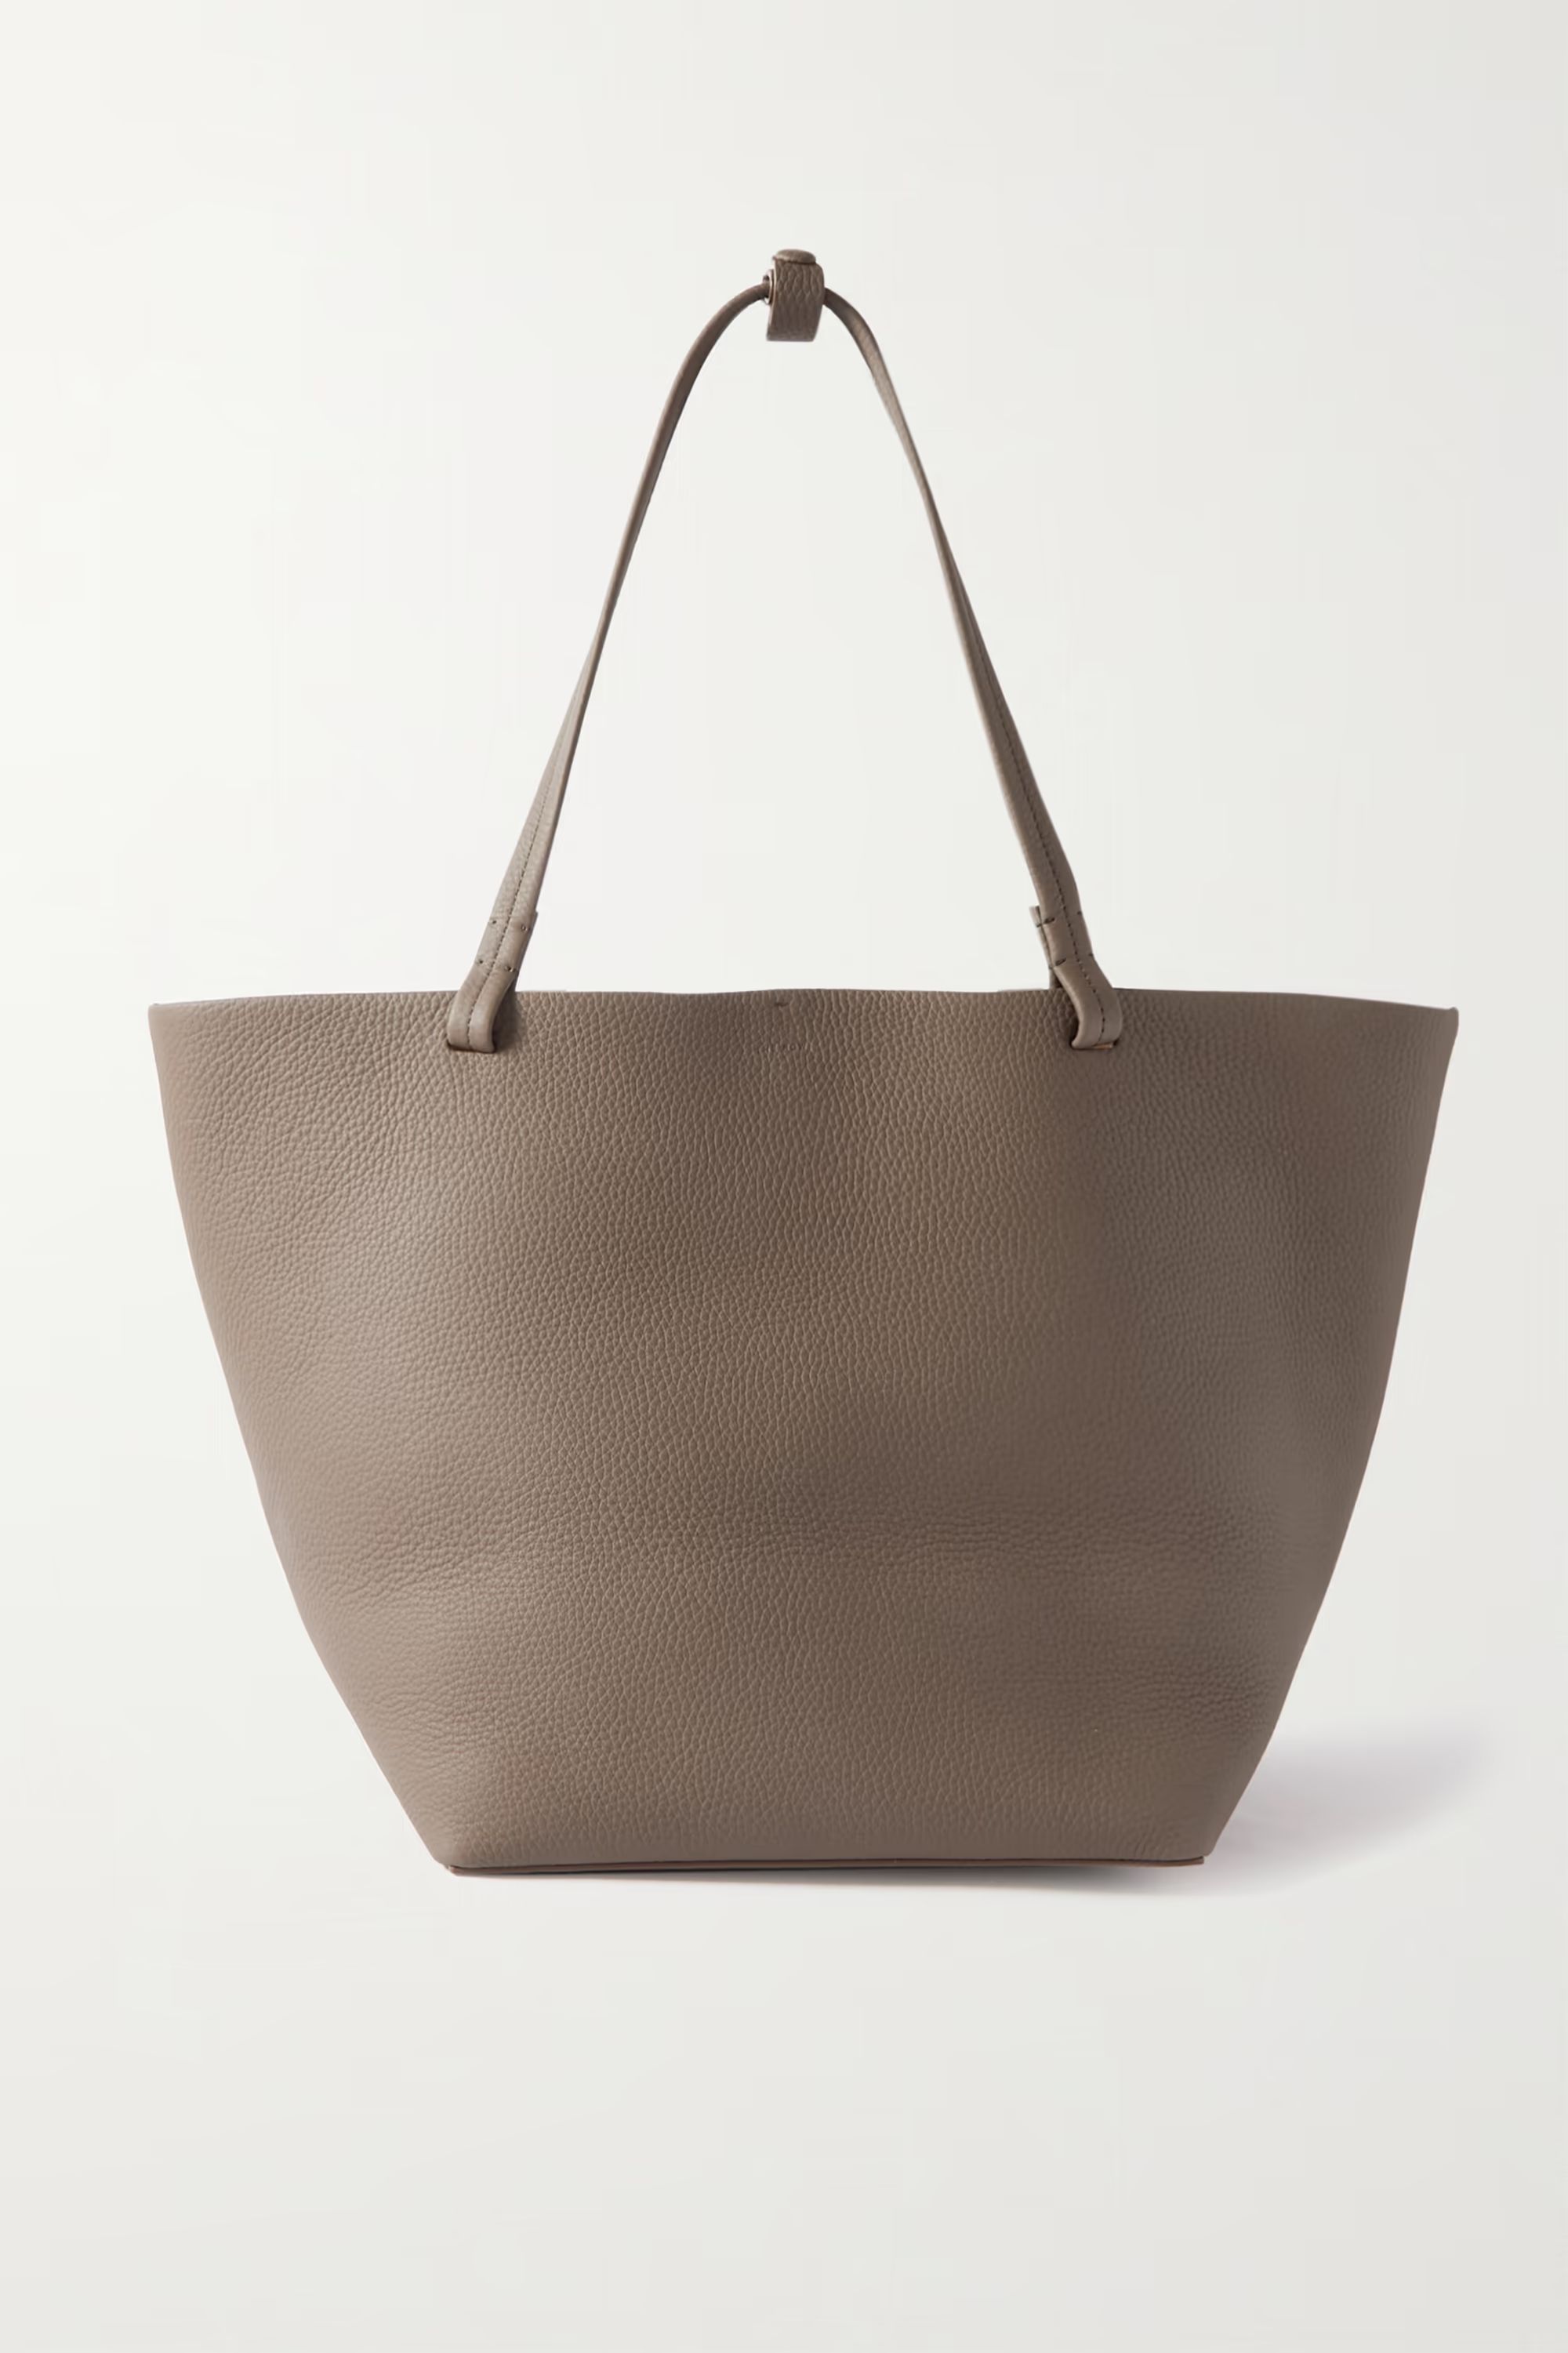 Park textured-leather tote | NET-A-PORTER (US)